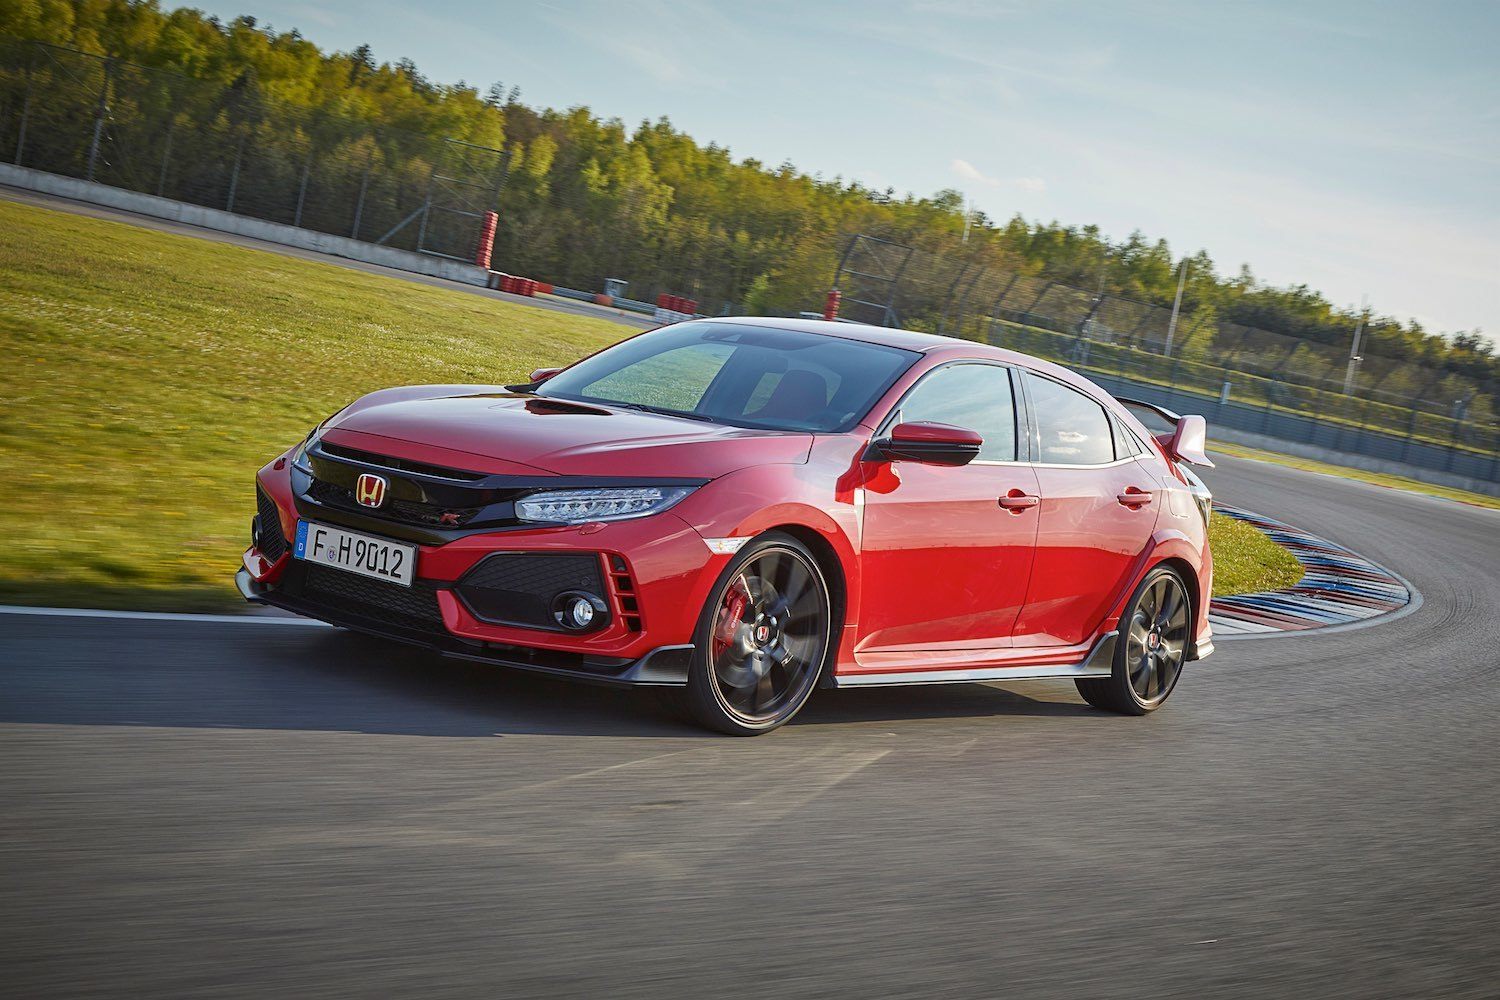 Tim Barnes-Clay reviews the 2018 Honda Civic Type R at the first drives 2